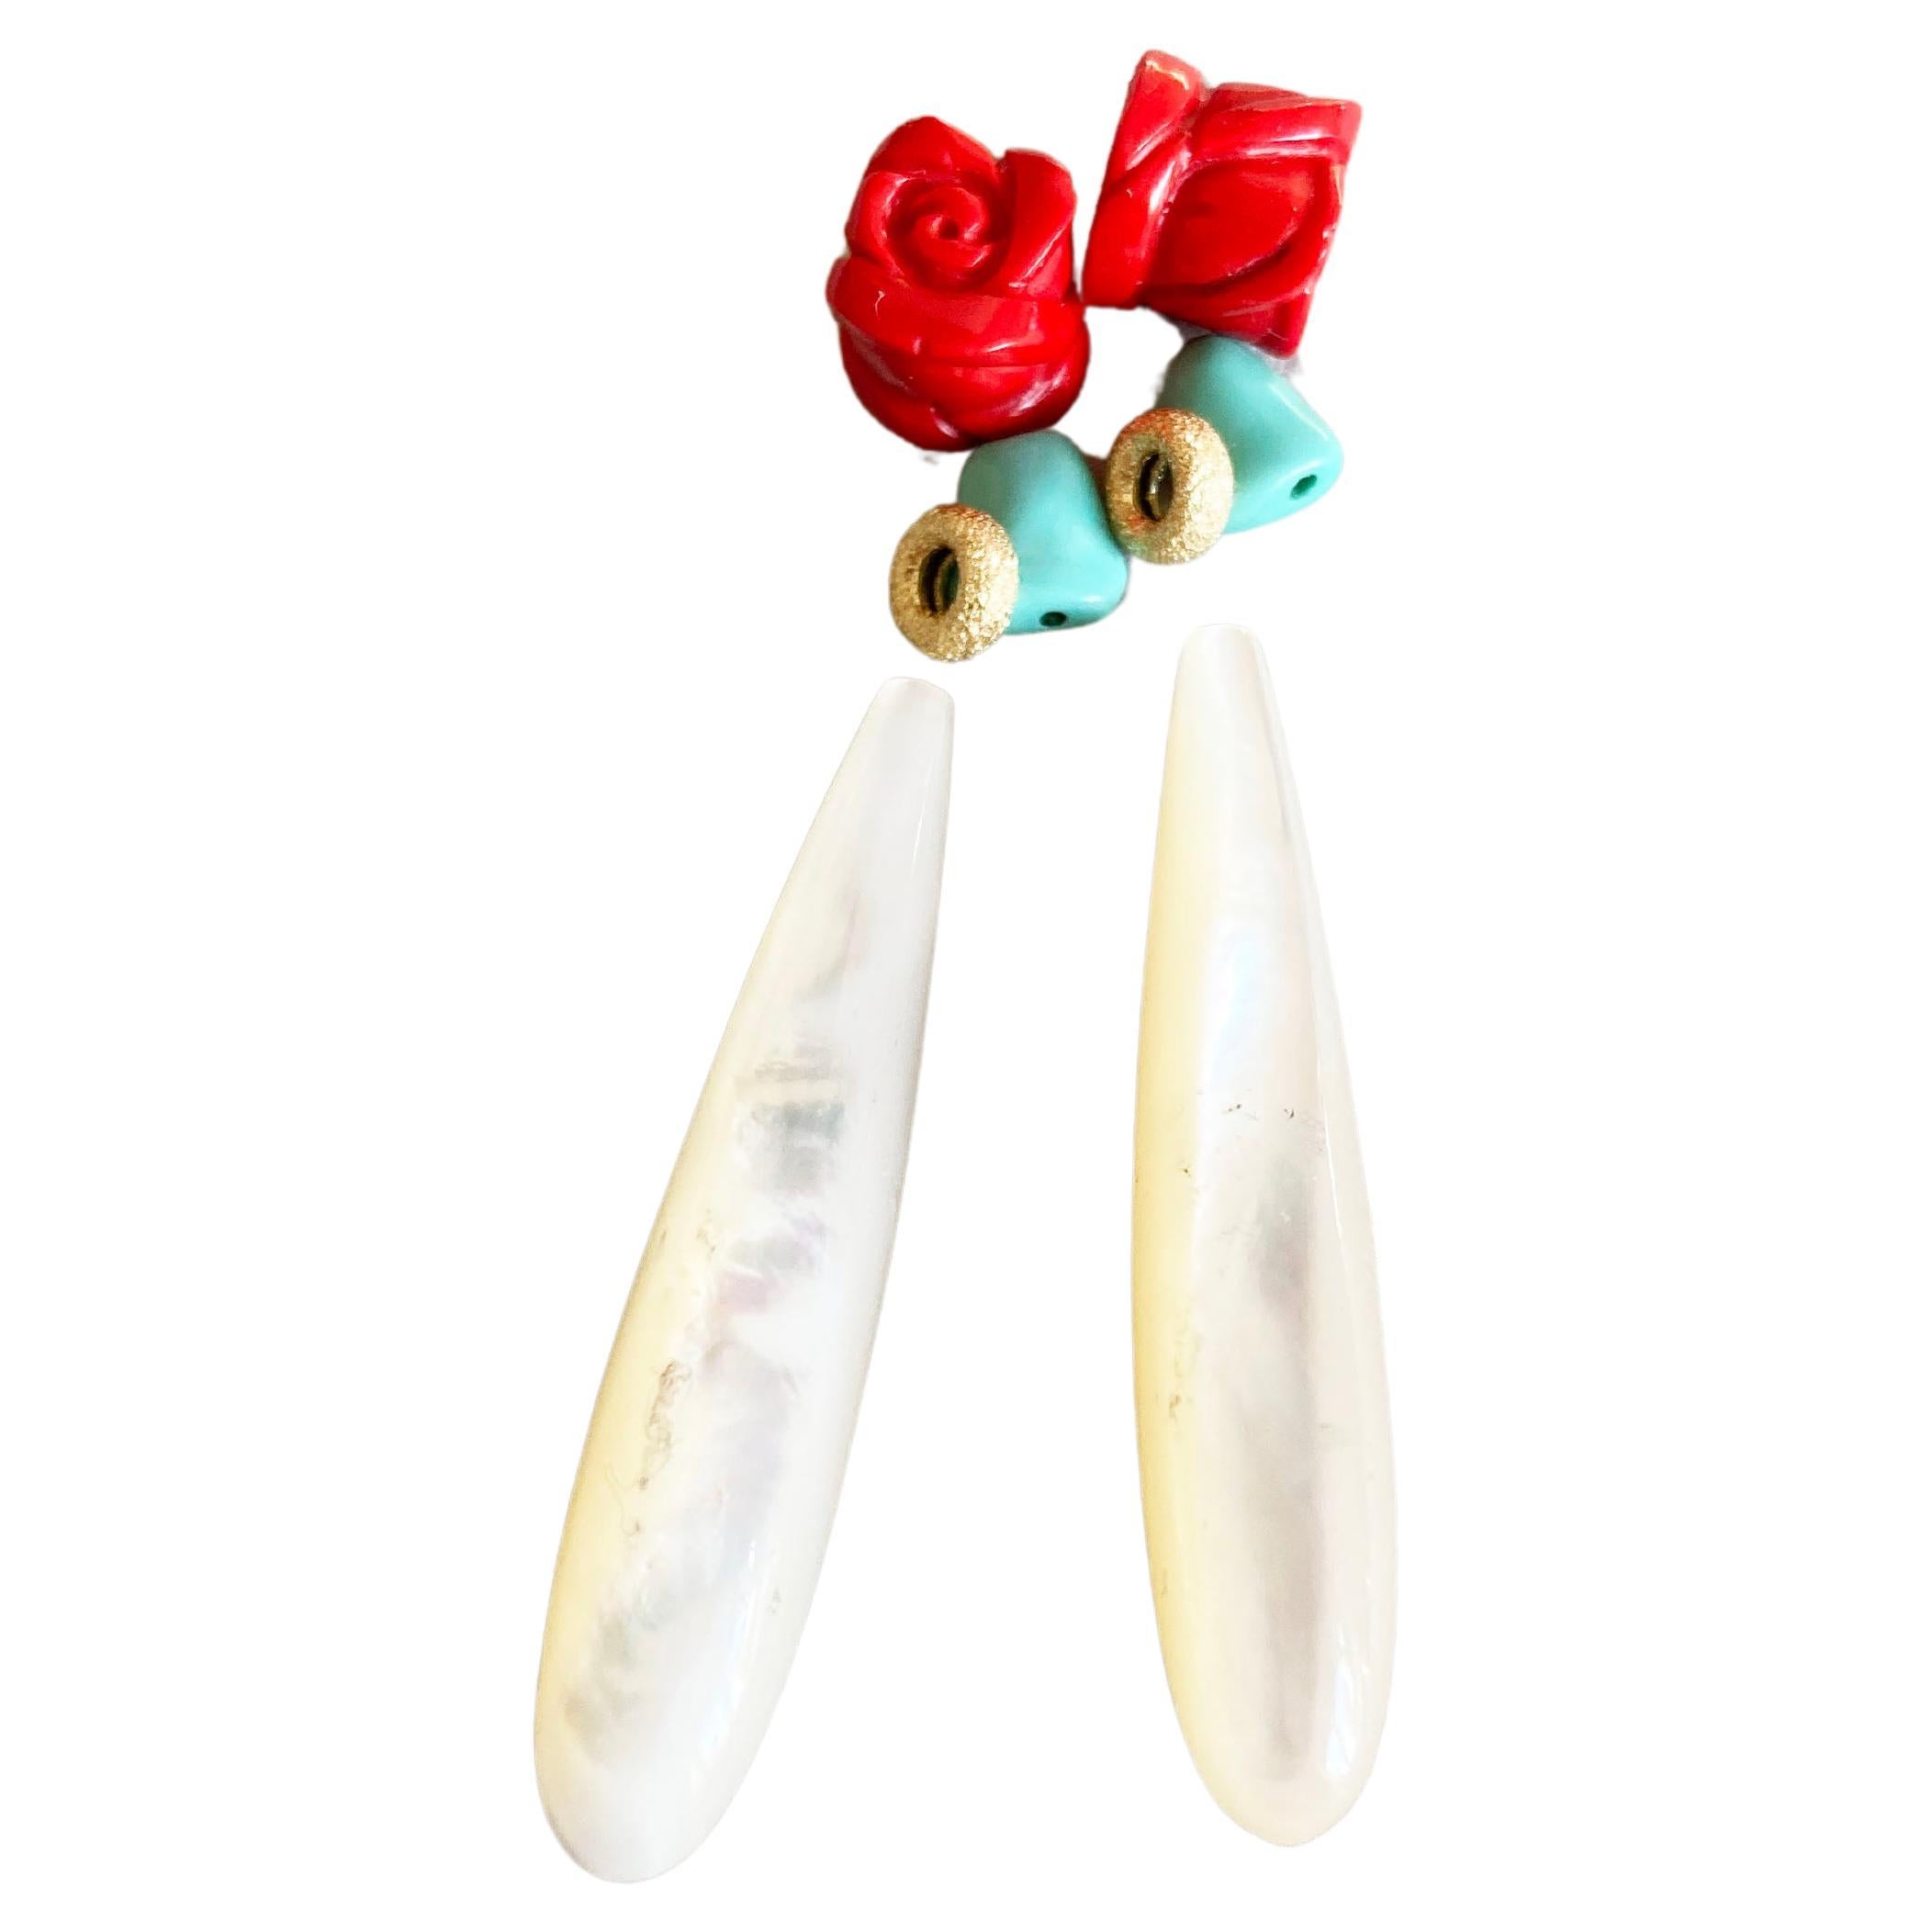 Rossella Ugolini 18K Yellow Gold Red Roses Deco Style Earrings Handmade in Italy In New Condition For Sale In Rome, IT